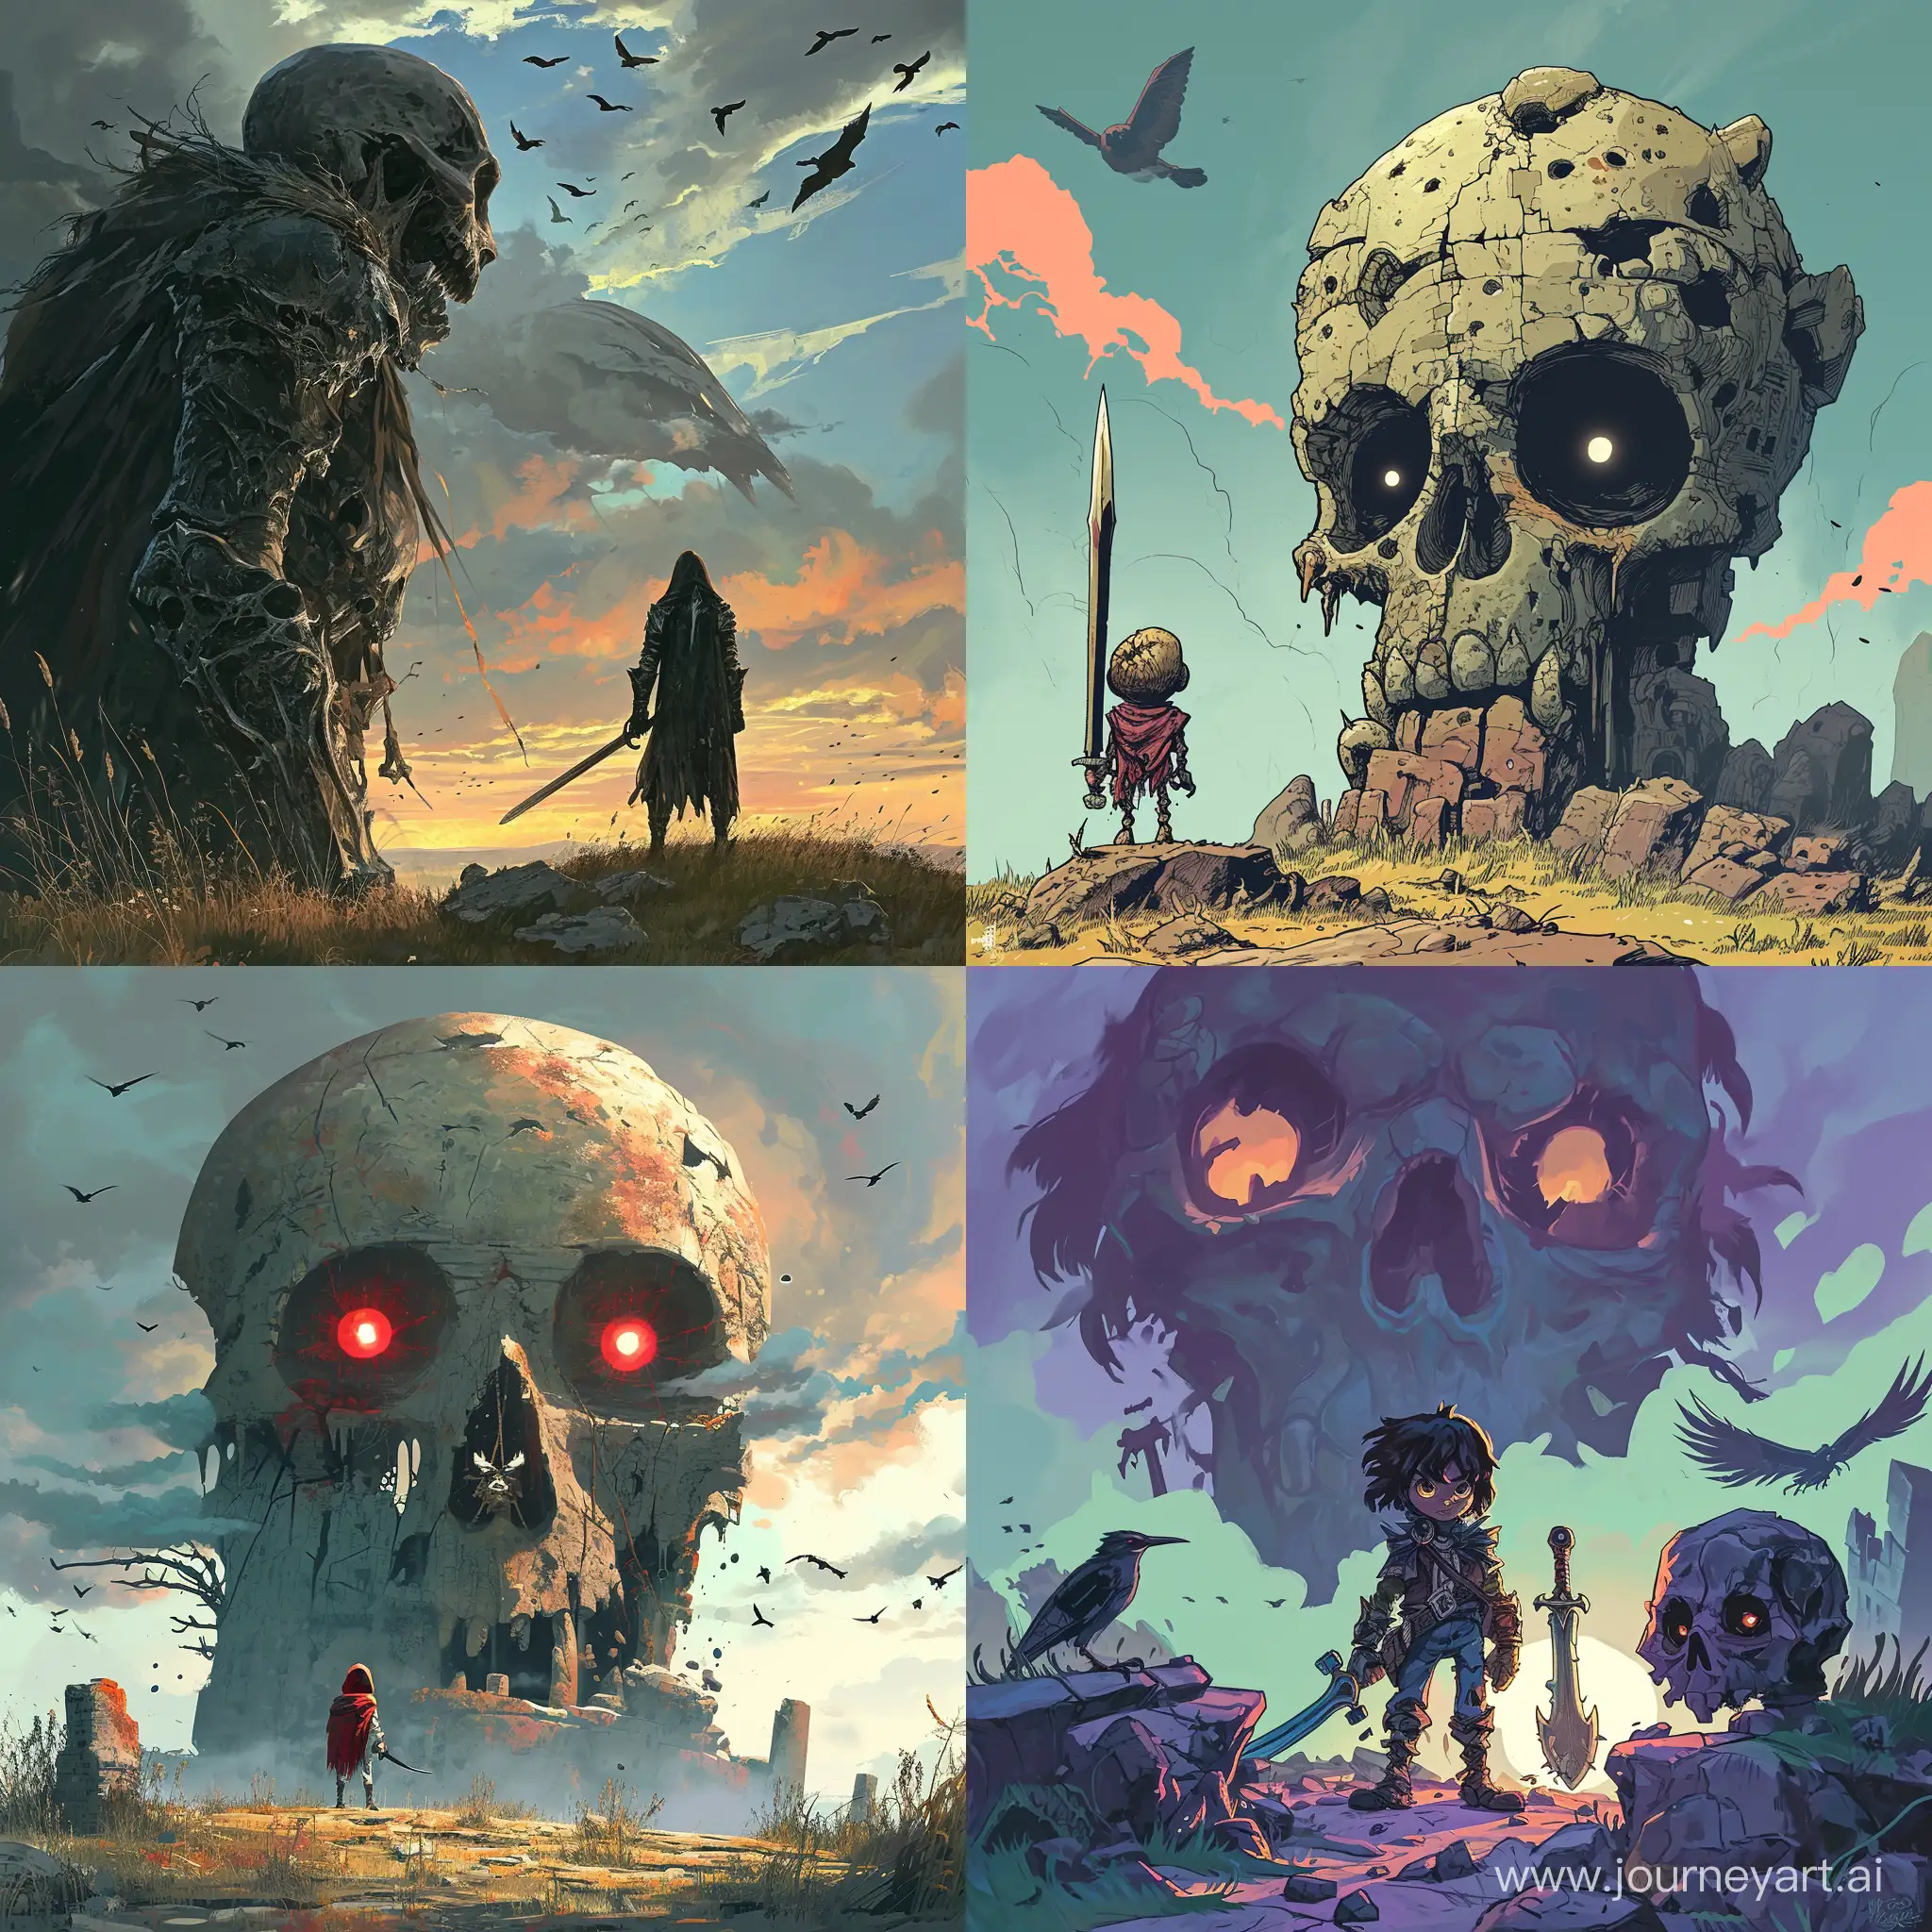 Cartoon::2, a warrior stands in a desolate land with a giant skull looming above them. The warrior is equipped with a sword and shield, there is a skull with glowing eyes in the background. The scene is set at dusk, there are crows flying around, Cartoon, высокое разрешение, высокая чёткость, чёткое изображение, микро детализация, высокая детализация, ультра реализация, максимальная детализация, много деталей, глубокие детали, детальное изображение, четкие линии. --v 6